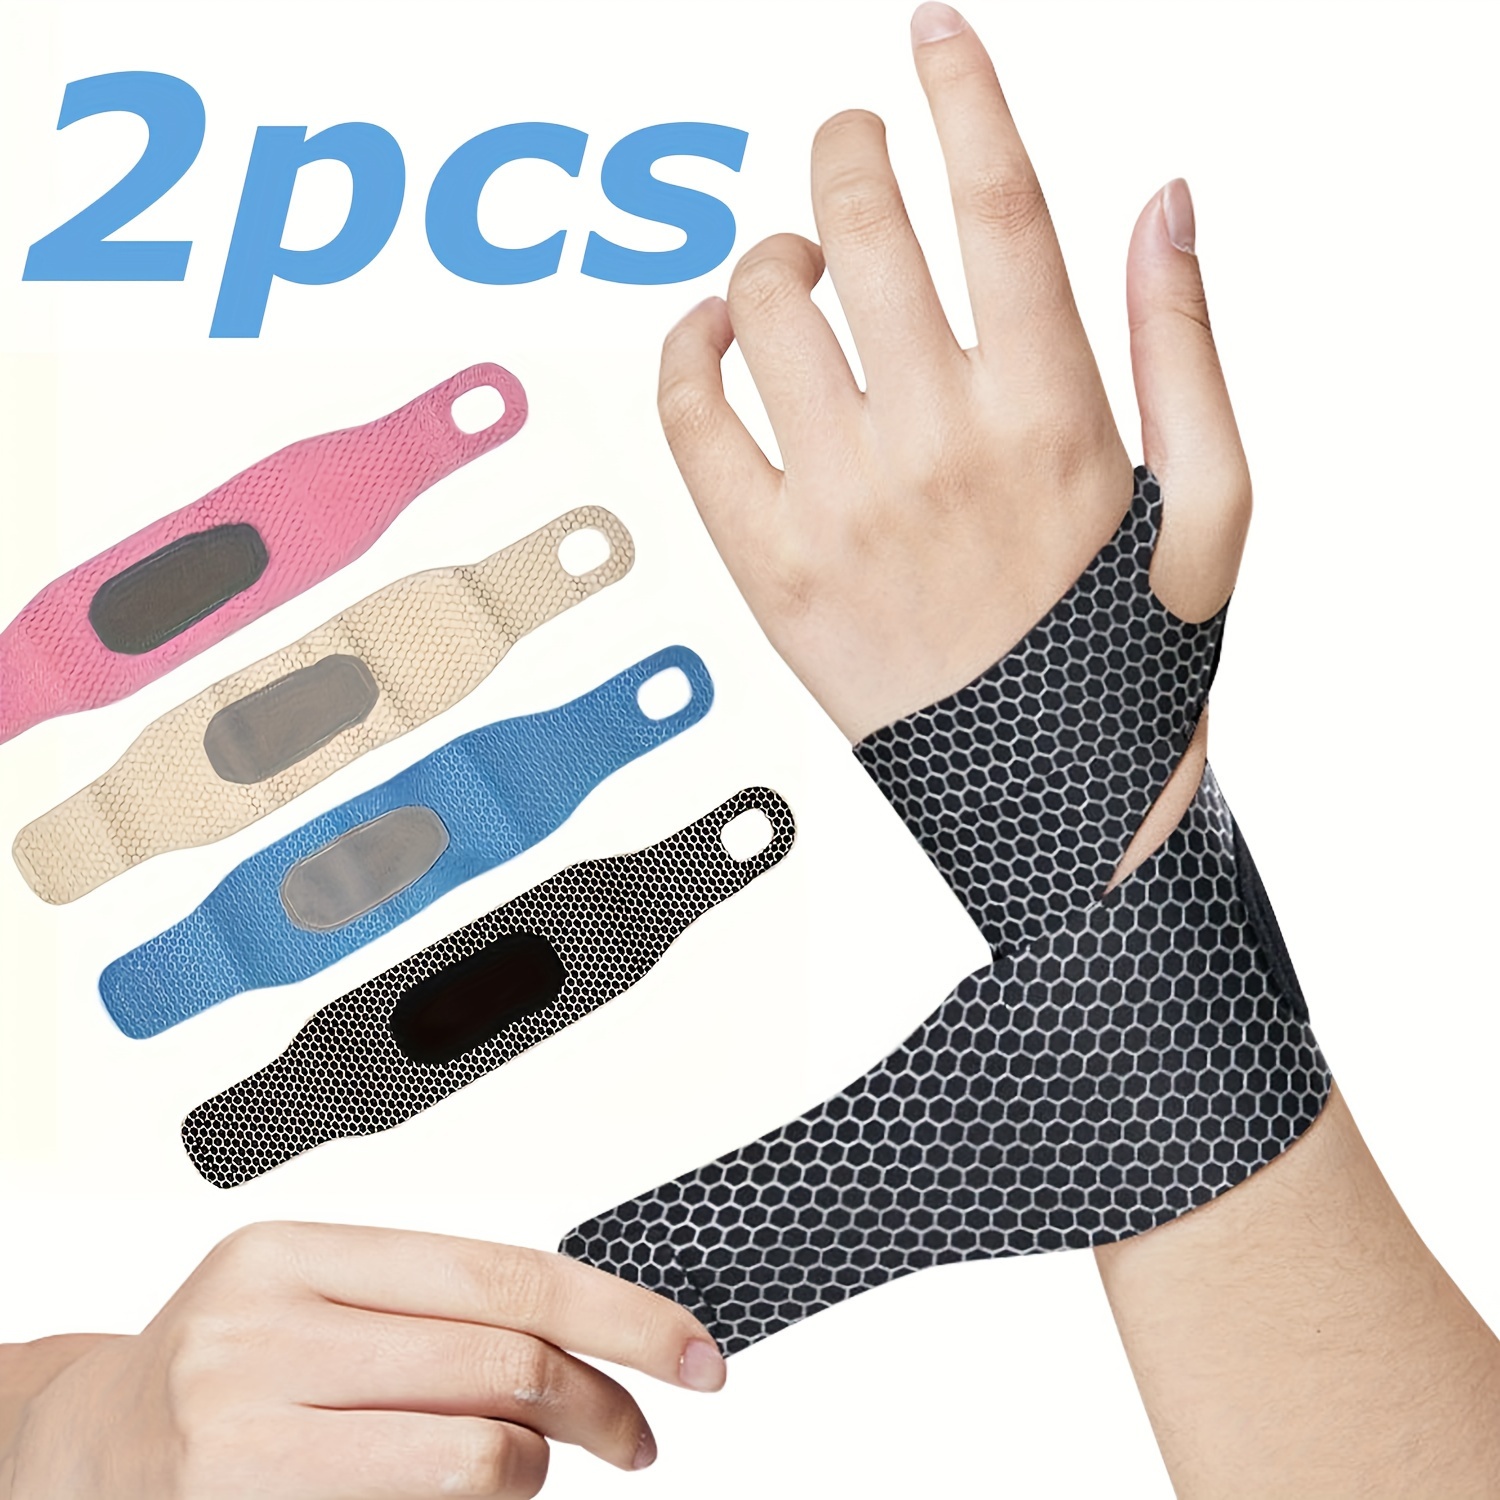 

2pcs Breathable Wrist Wraps For Women & Men - Elastic Adjustable Comfortable Hand Braces For Right And Left Hands - Lightweight Compression And Support